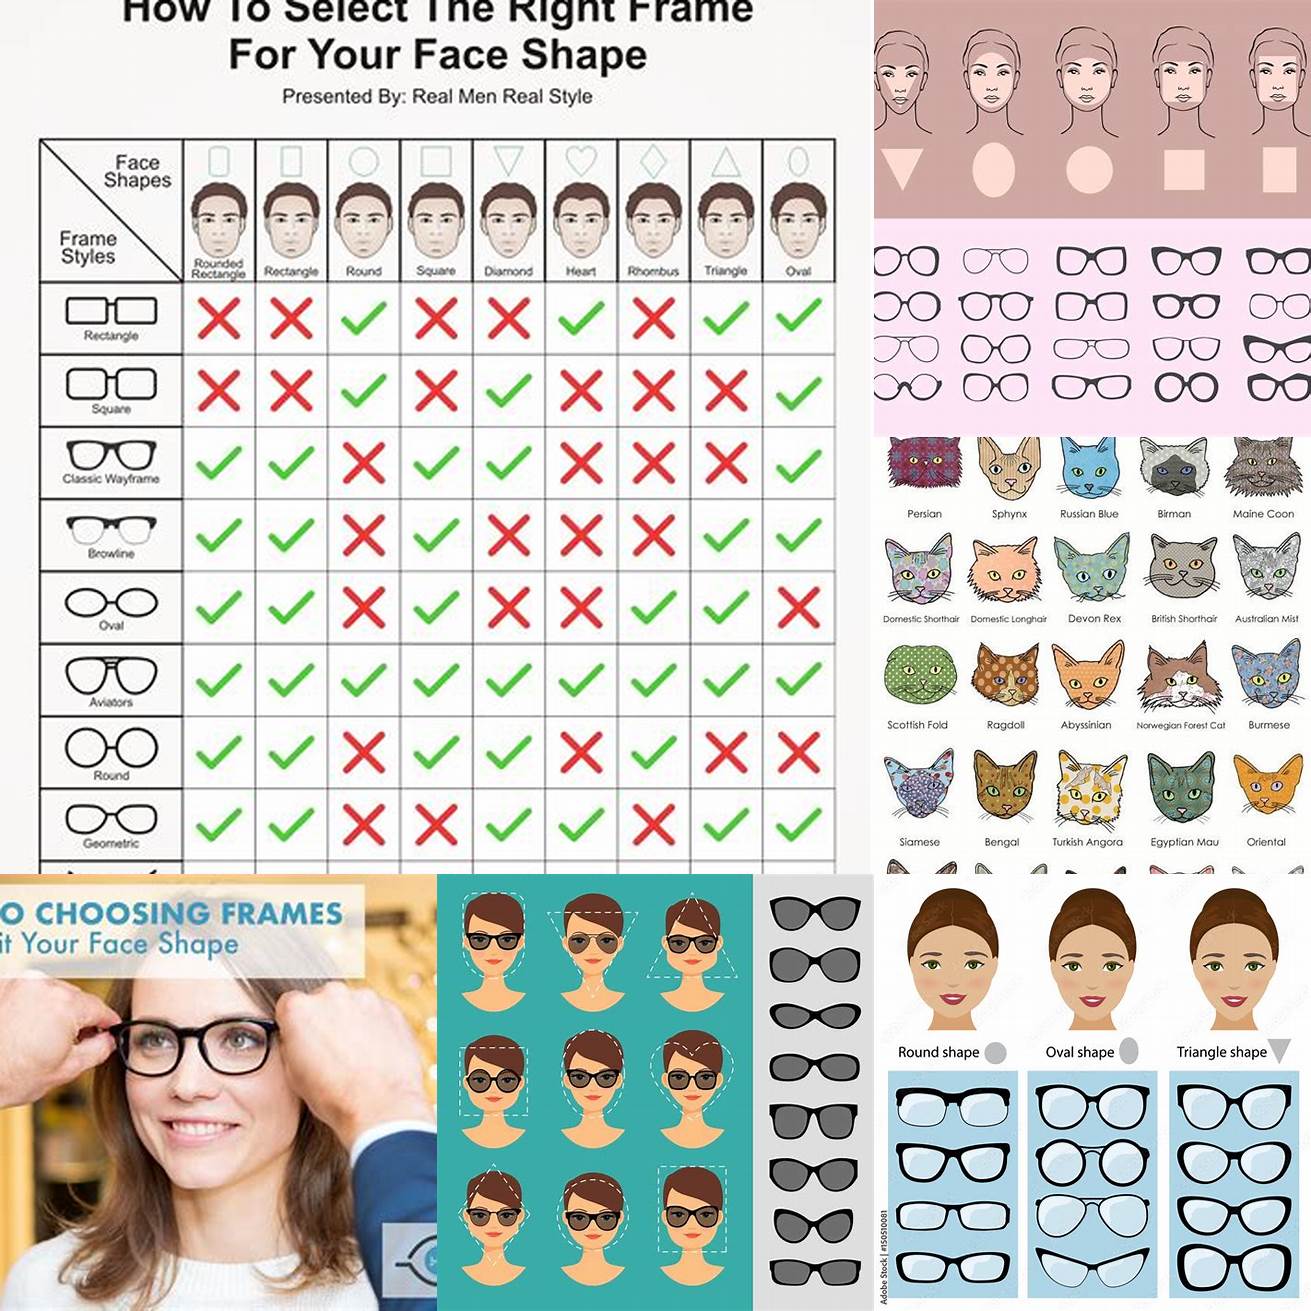 Choose a frame that complements your face shape